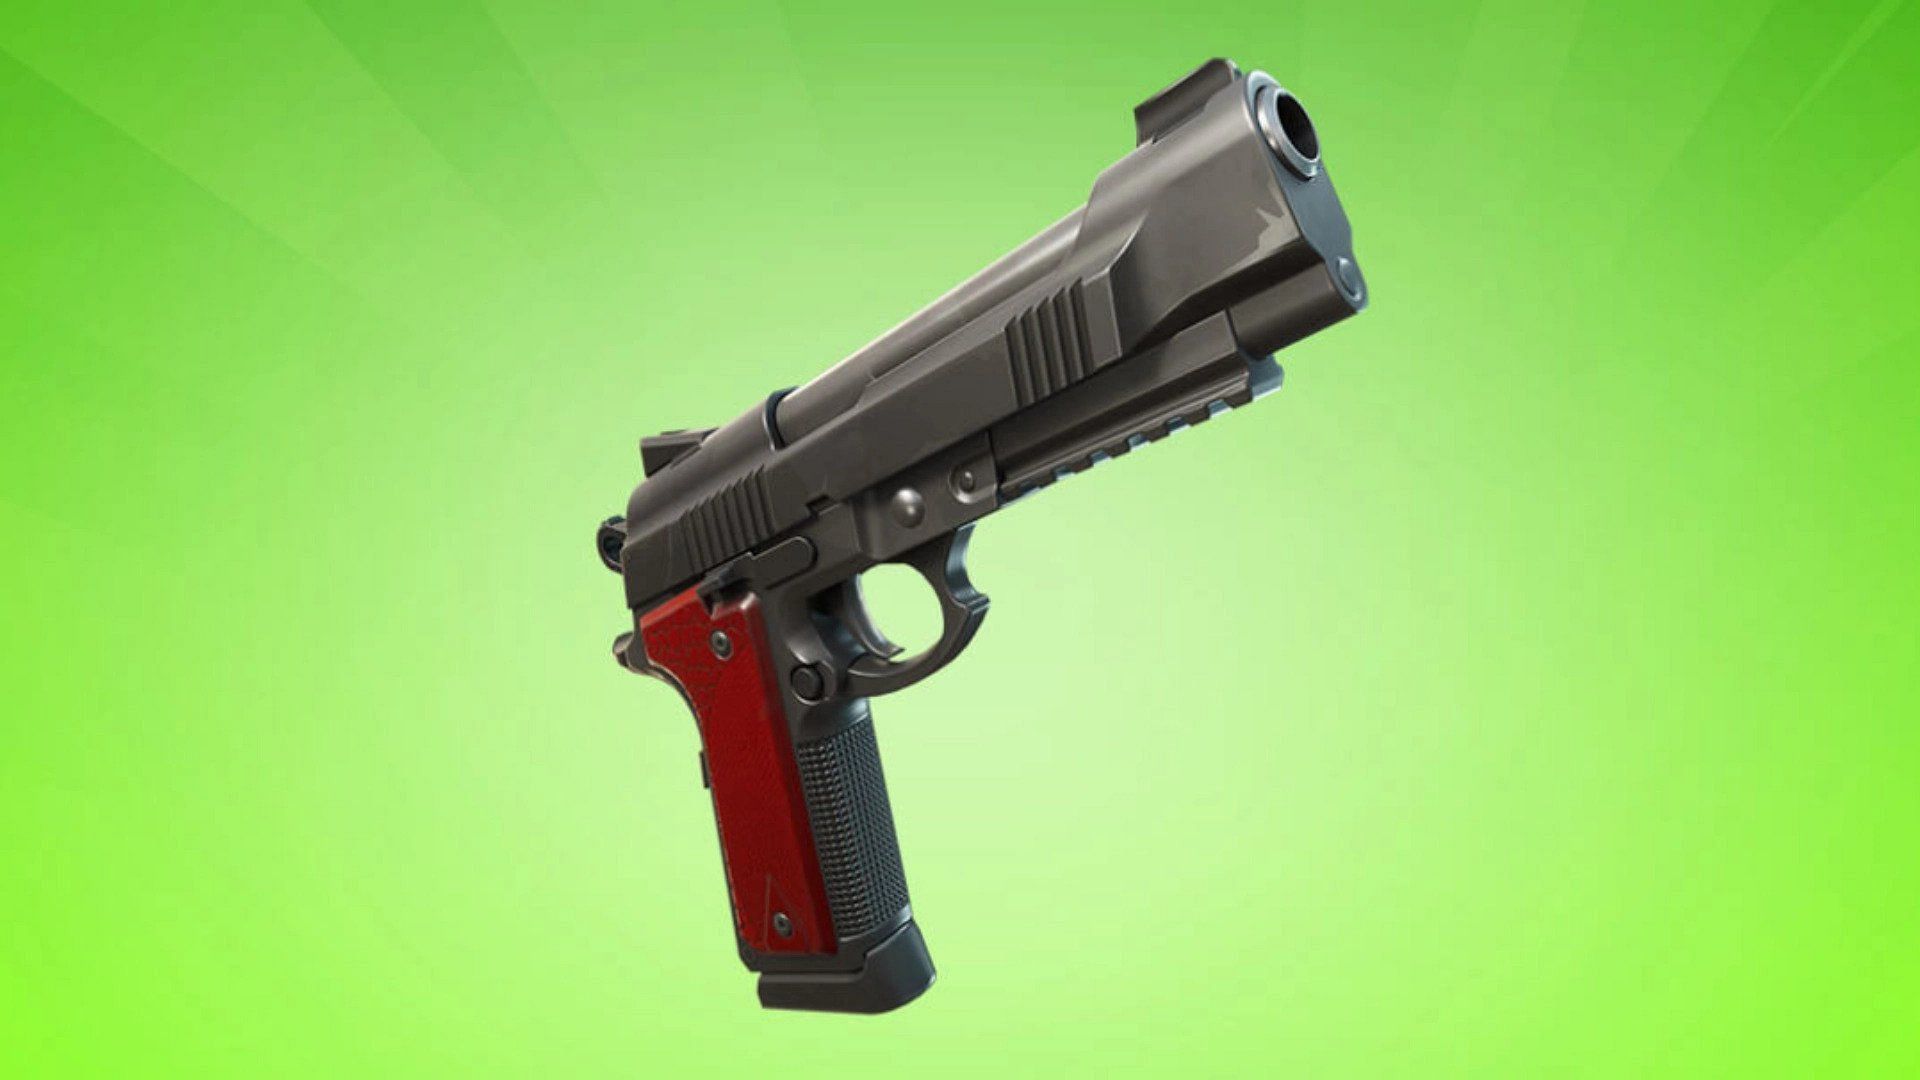 Sidearm Pistol is the most underrated item in Fortnite, according to Ninja (Image via Epic Games)